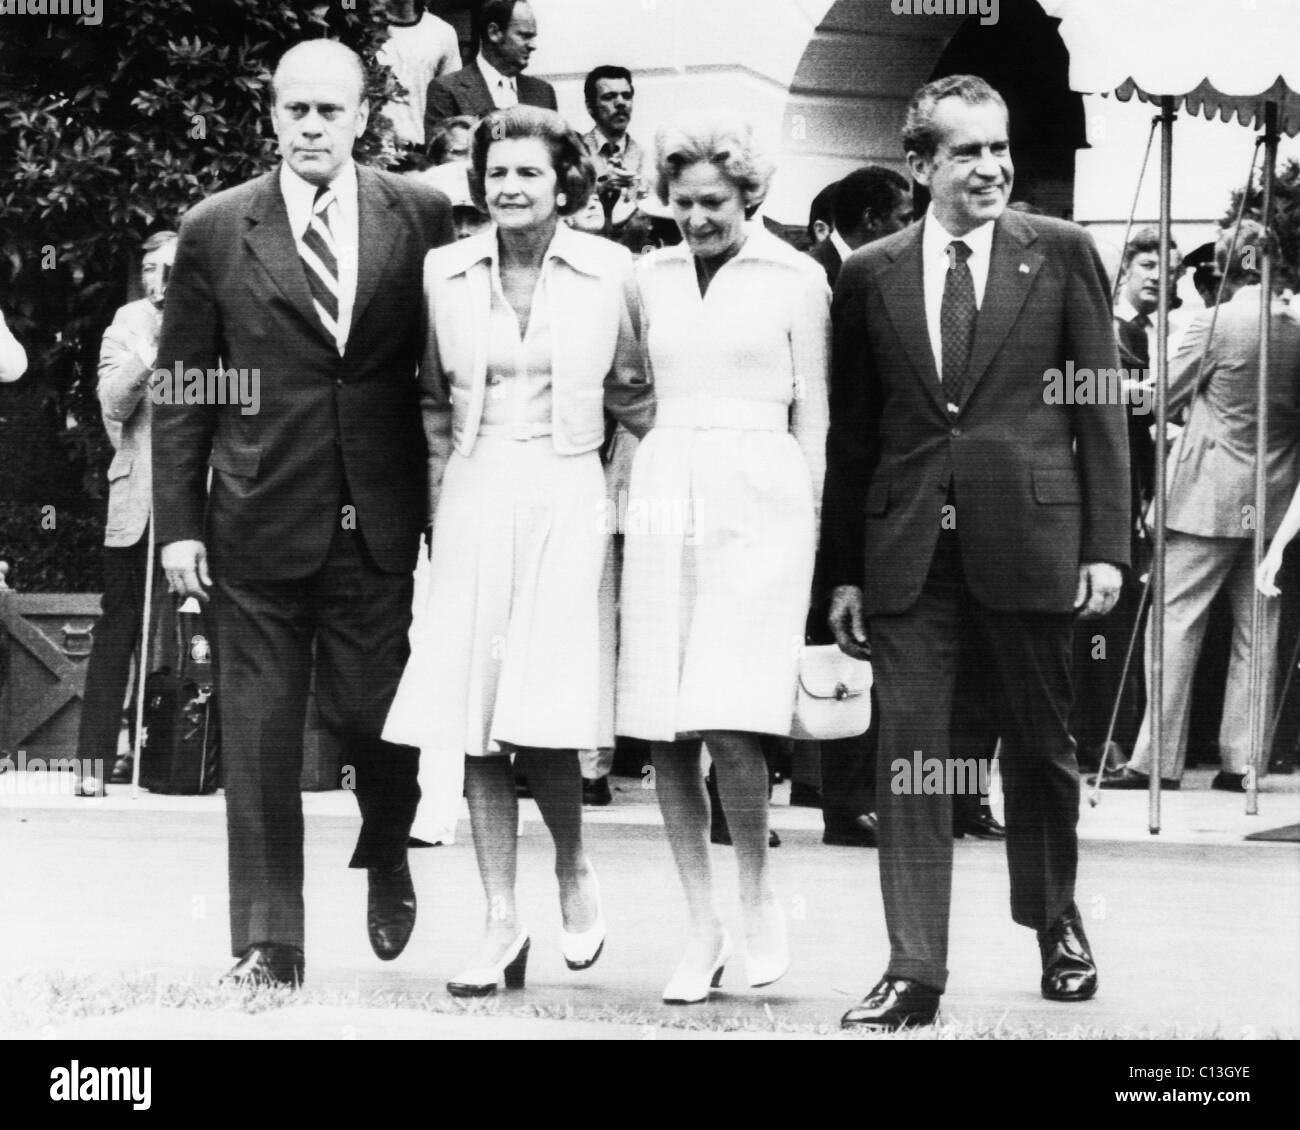 Gerald Ford Inauguration. From left: US President-Elect Gerald Ford and future First Lady Betty Ford walk with First Lady Patricia Nixon and President Richard Nixon shortly before Ford was sworn in as President, Washington, D.C., August 9th, 1974. Stock Photo